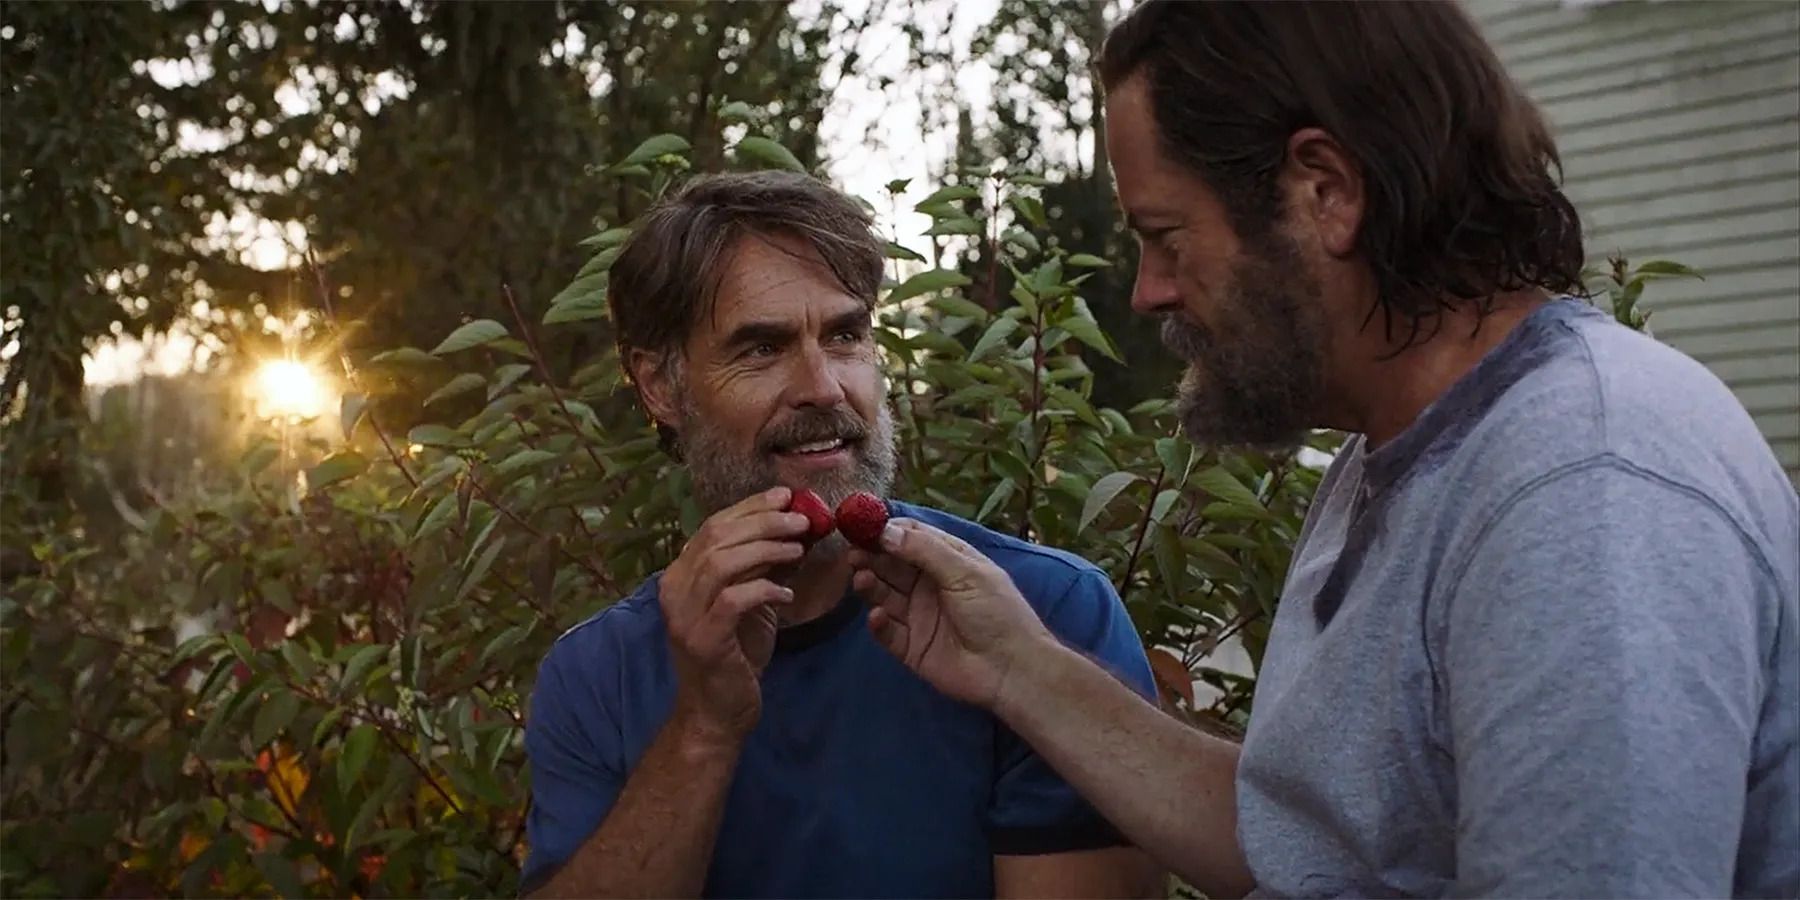 Nick Offerman as Bill and Murray Bartlett as Frank in The Last of Us-Long, Long Time